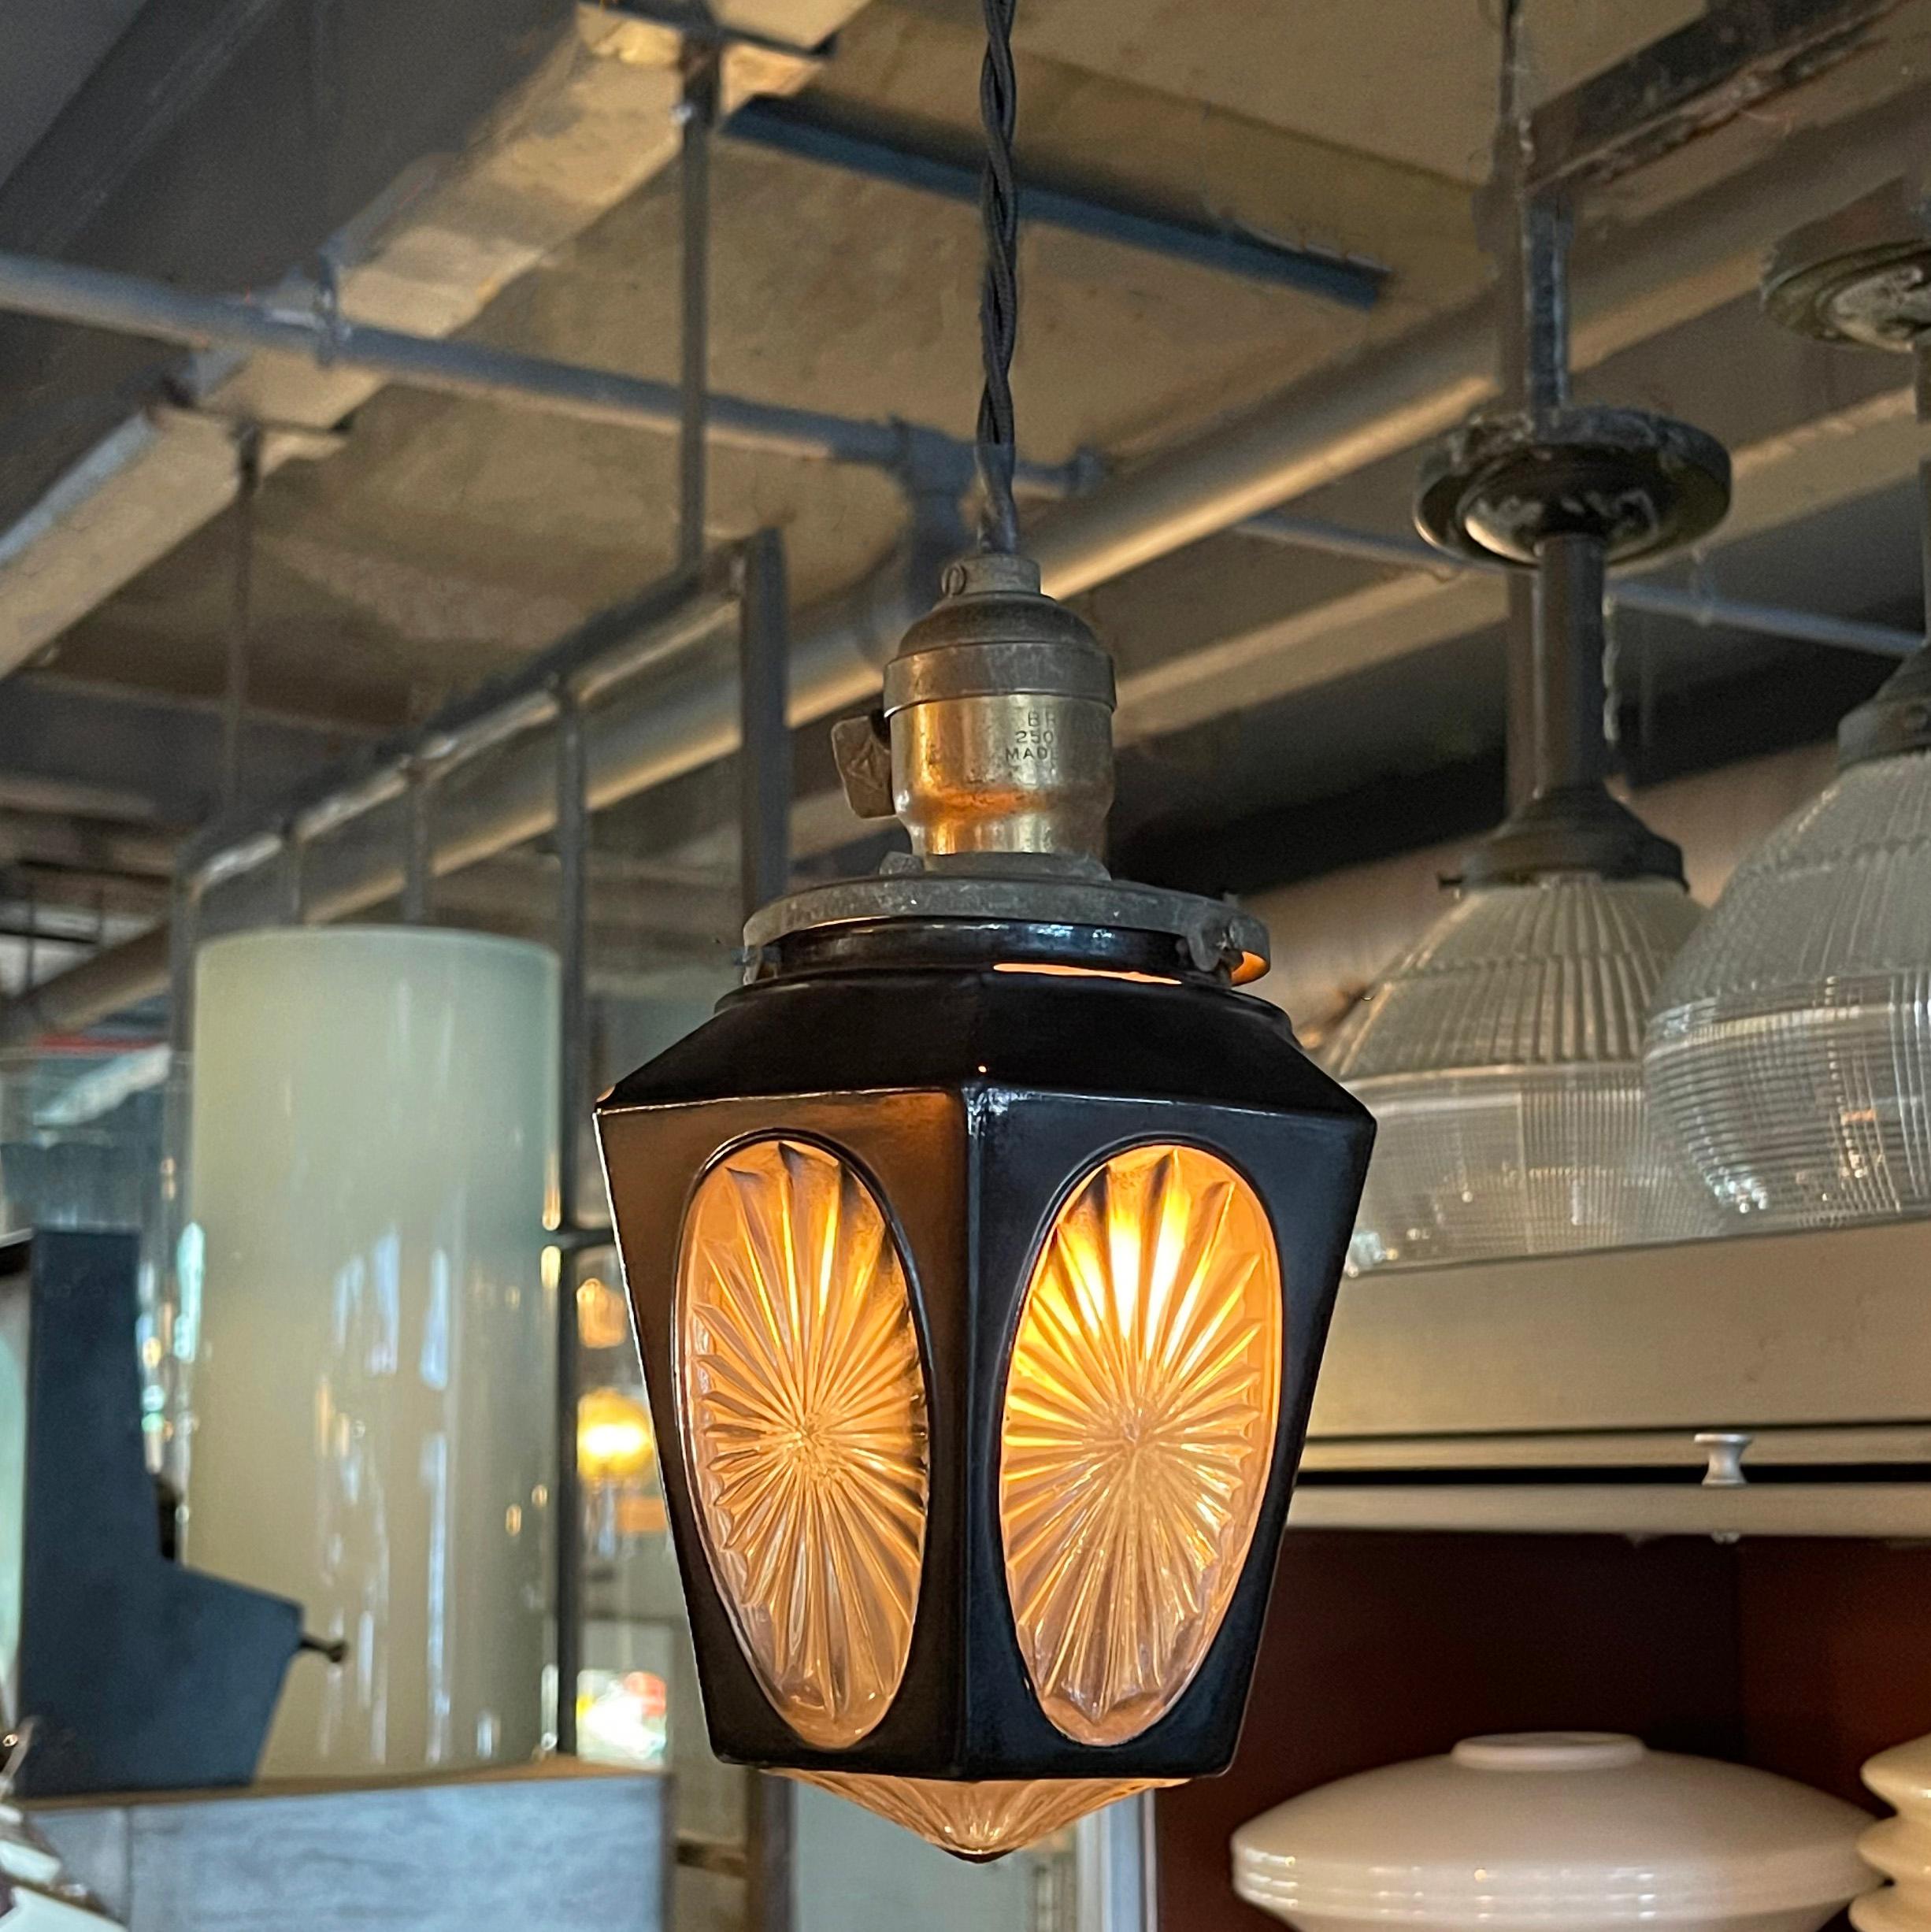 Petite, craftsman, pendant light features a faceted black glass shade with cut glass cut-outs and bottom with brass paddle switch fitter. The pendant is newly wired with 36 inches of braided cloth cord to accept up to a 75 watt, medium socket bulb.